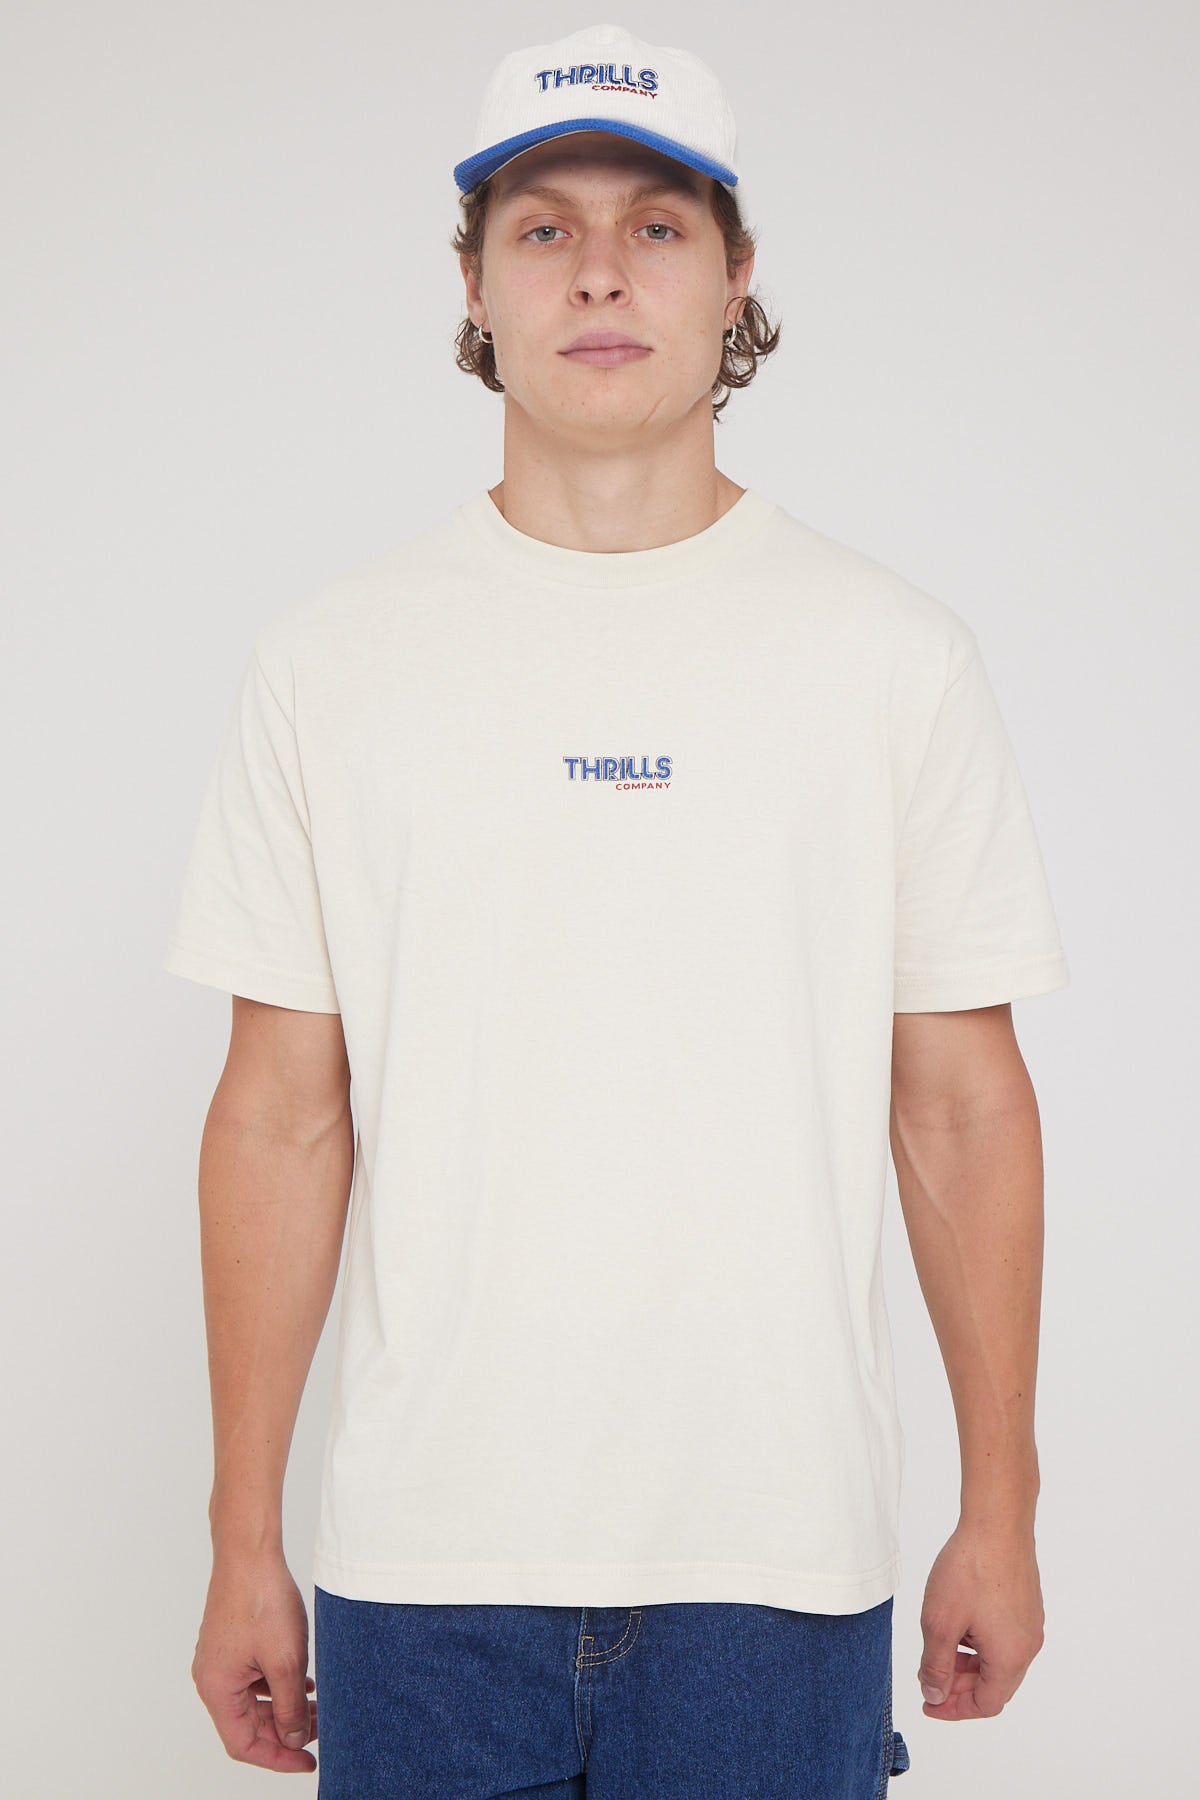 Thrills Going The Distance Merch Fit Tee Heritage White